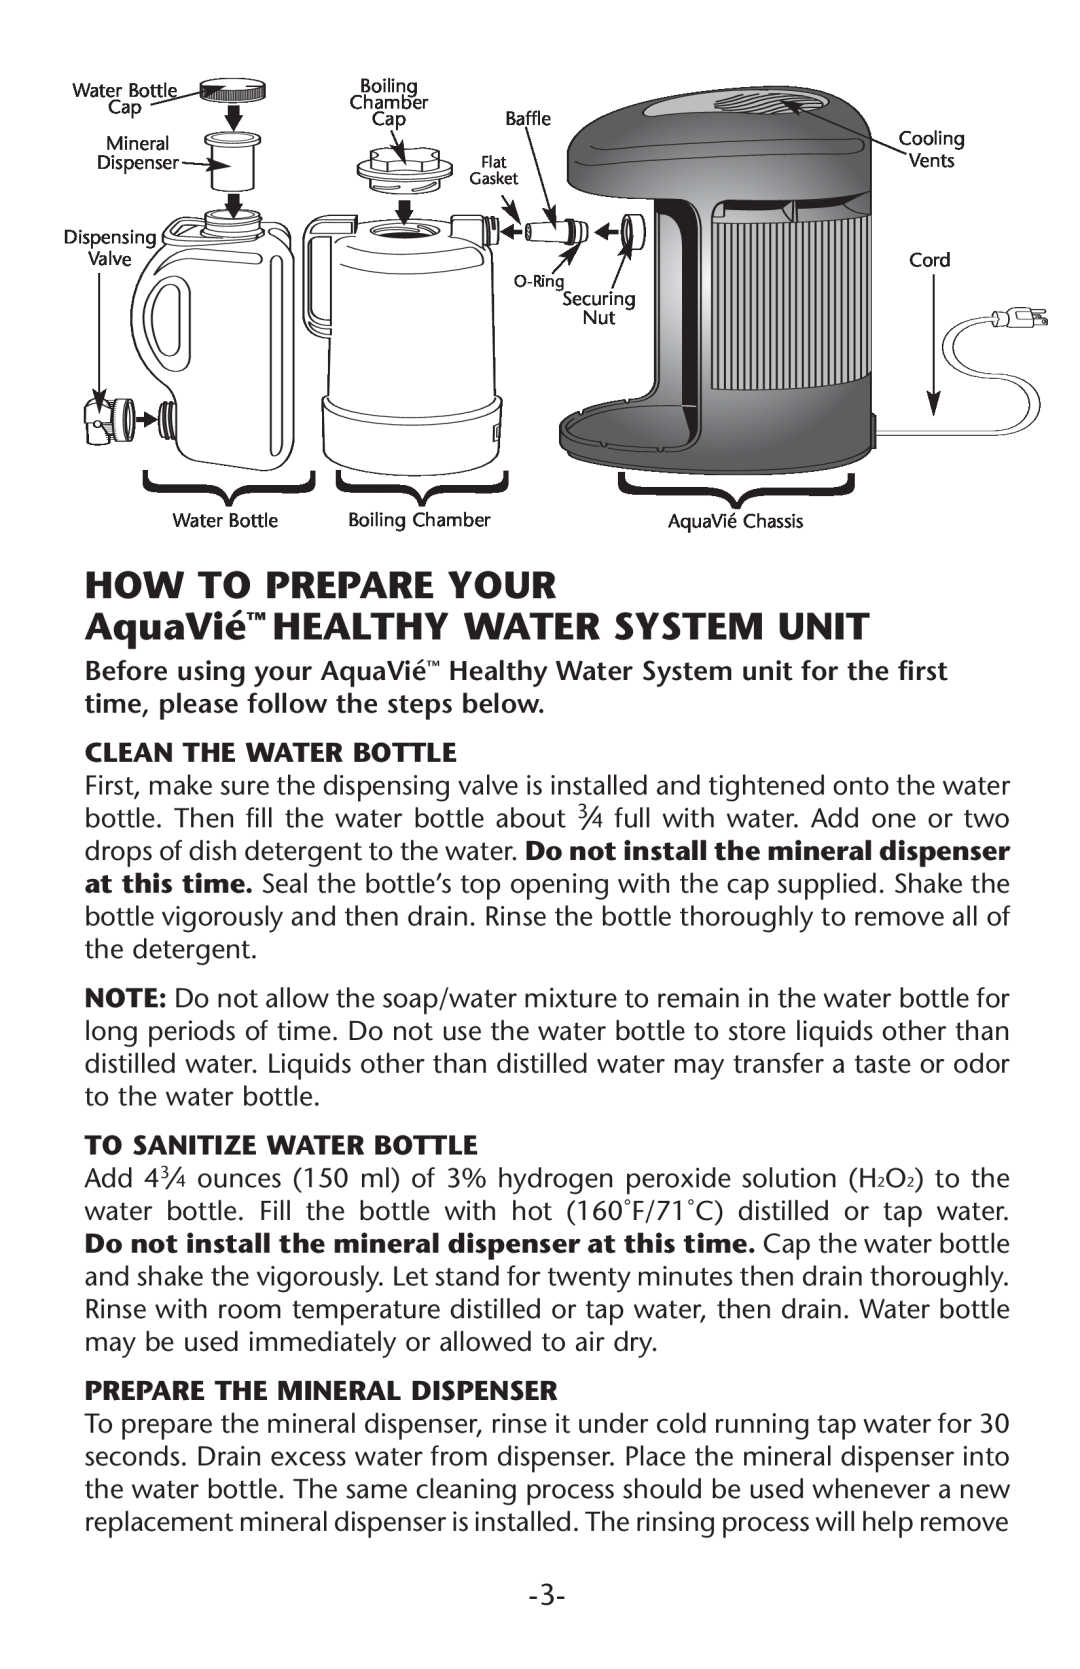 Regal Ware W15120 HOW TO PREPARE YOUR AquaVié HEALTHY WATER SYSTEM UNIT, Clean The Water Bottle, To Sanitize Water Bottle 